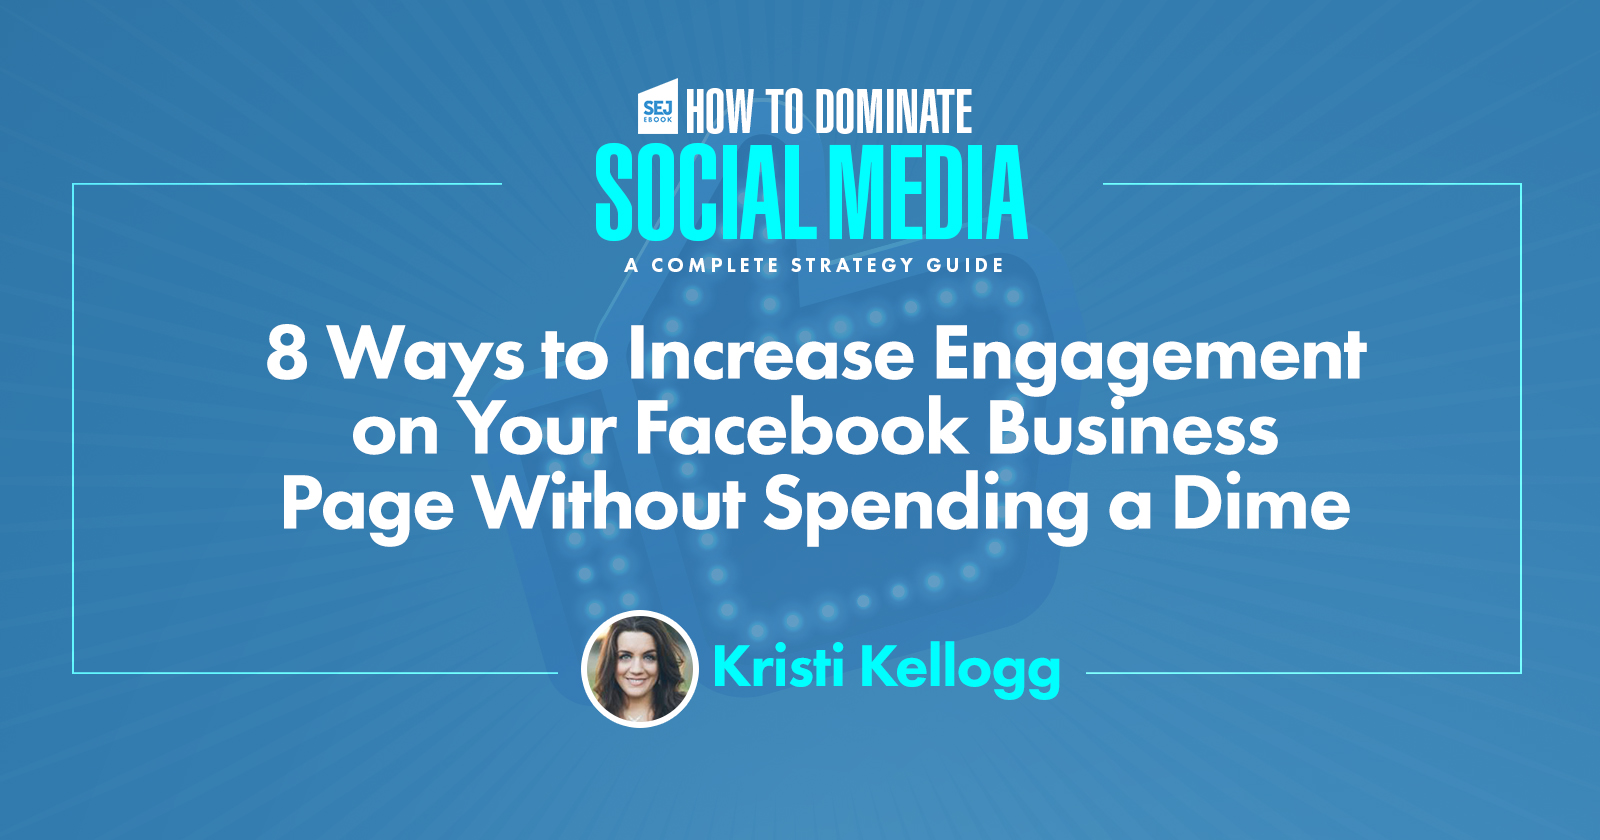 8 Ways to Increase Engagement on Your Facebook Business Page Without Spending a Dime